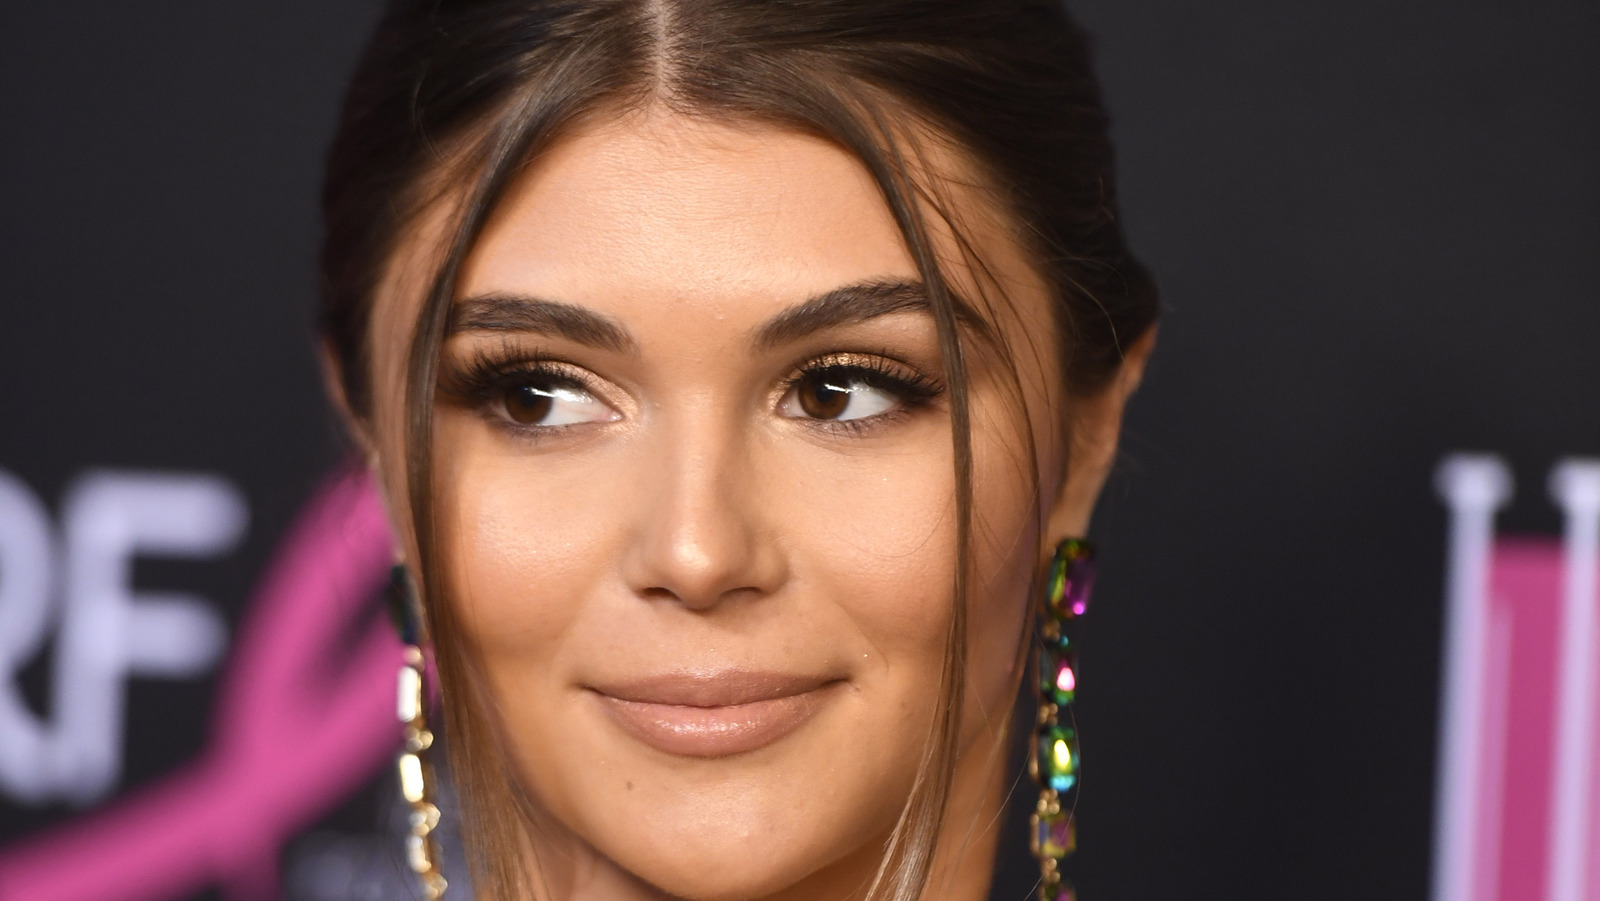 How Olivia Jade Responded To The College Admissions Scandal Reference In Gossip Girl